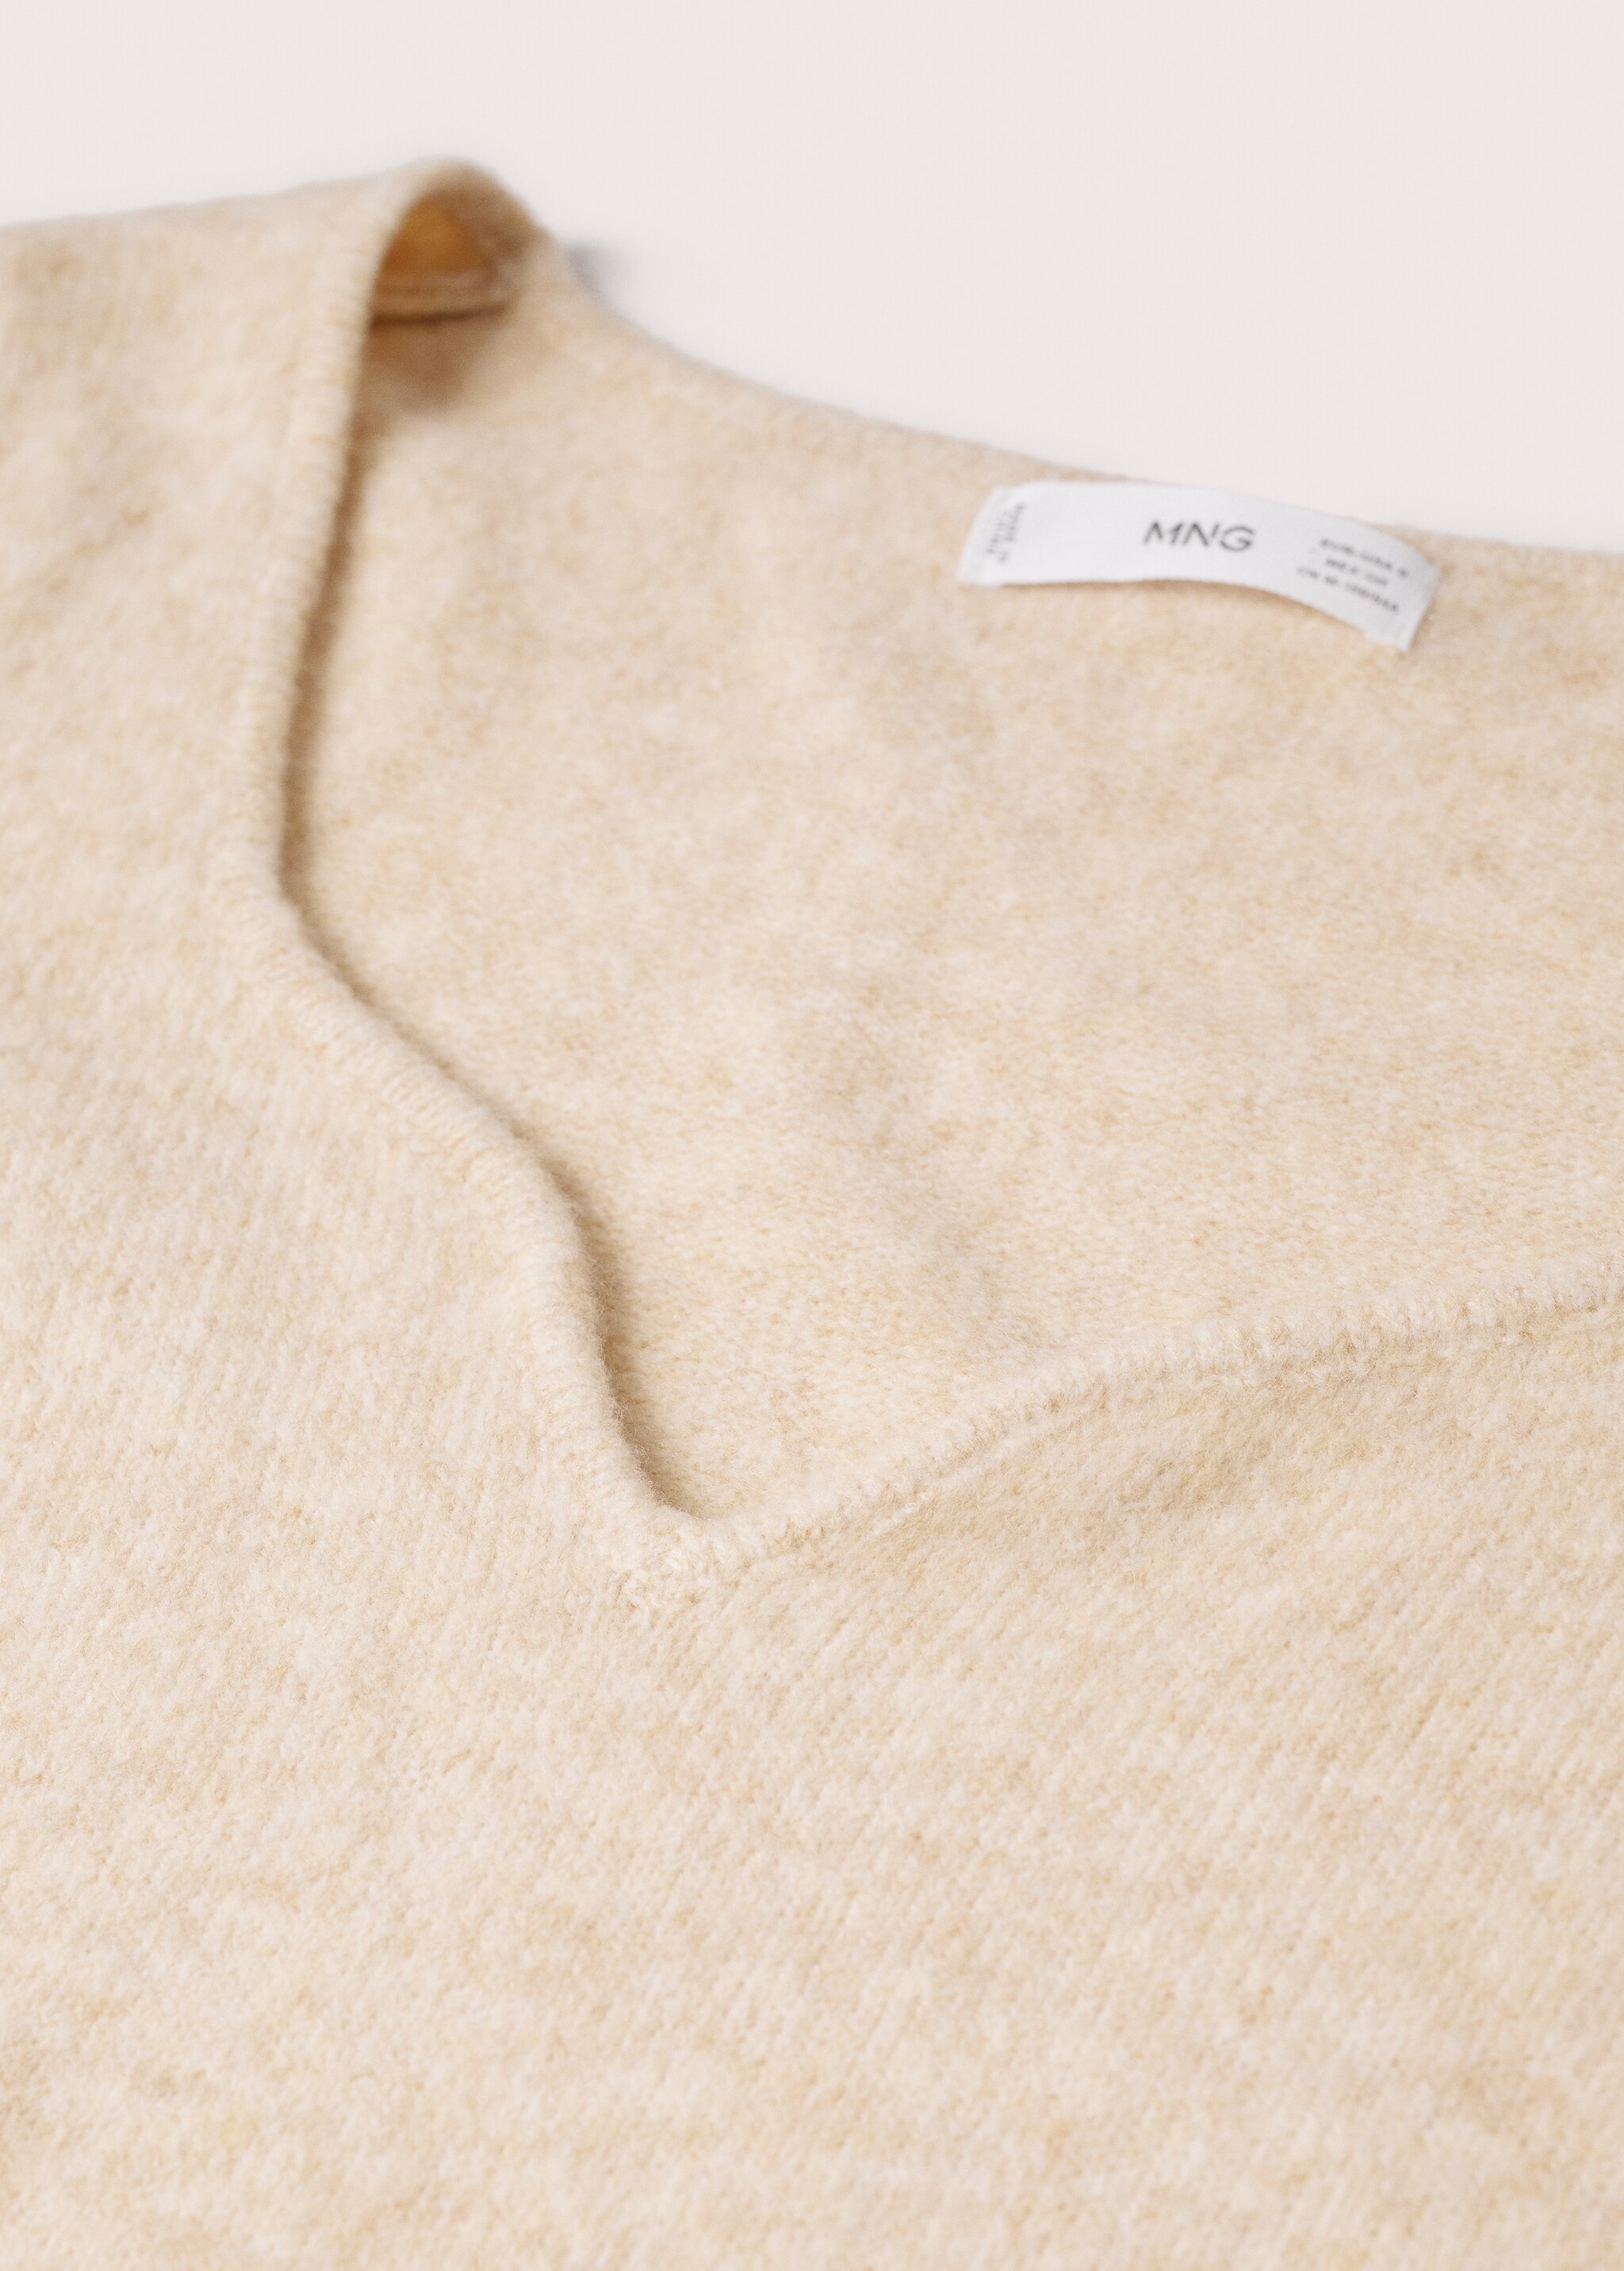 Textured knit sweater - Details of the article 8